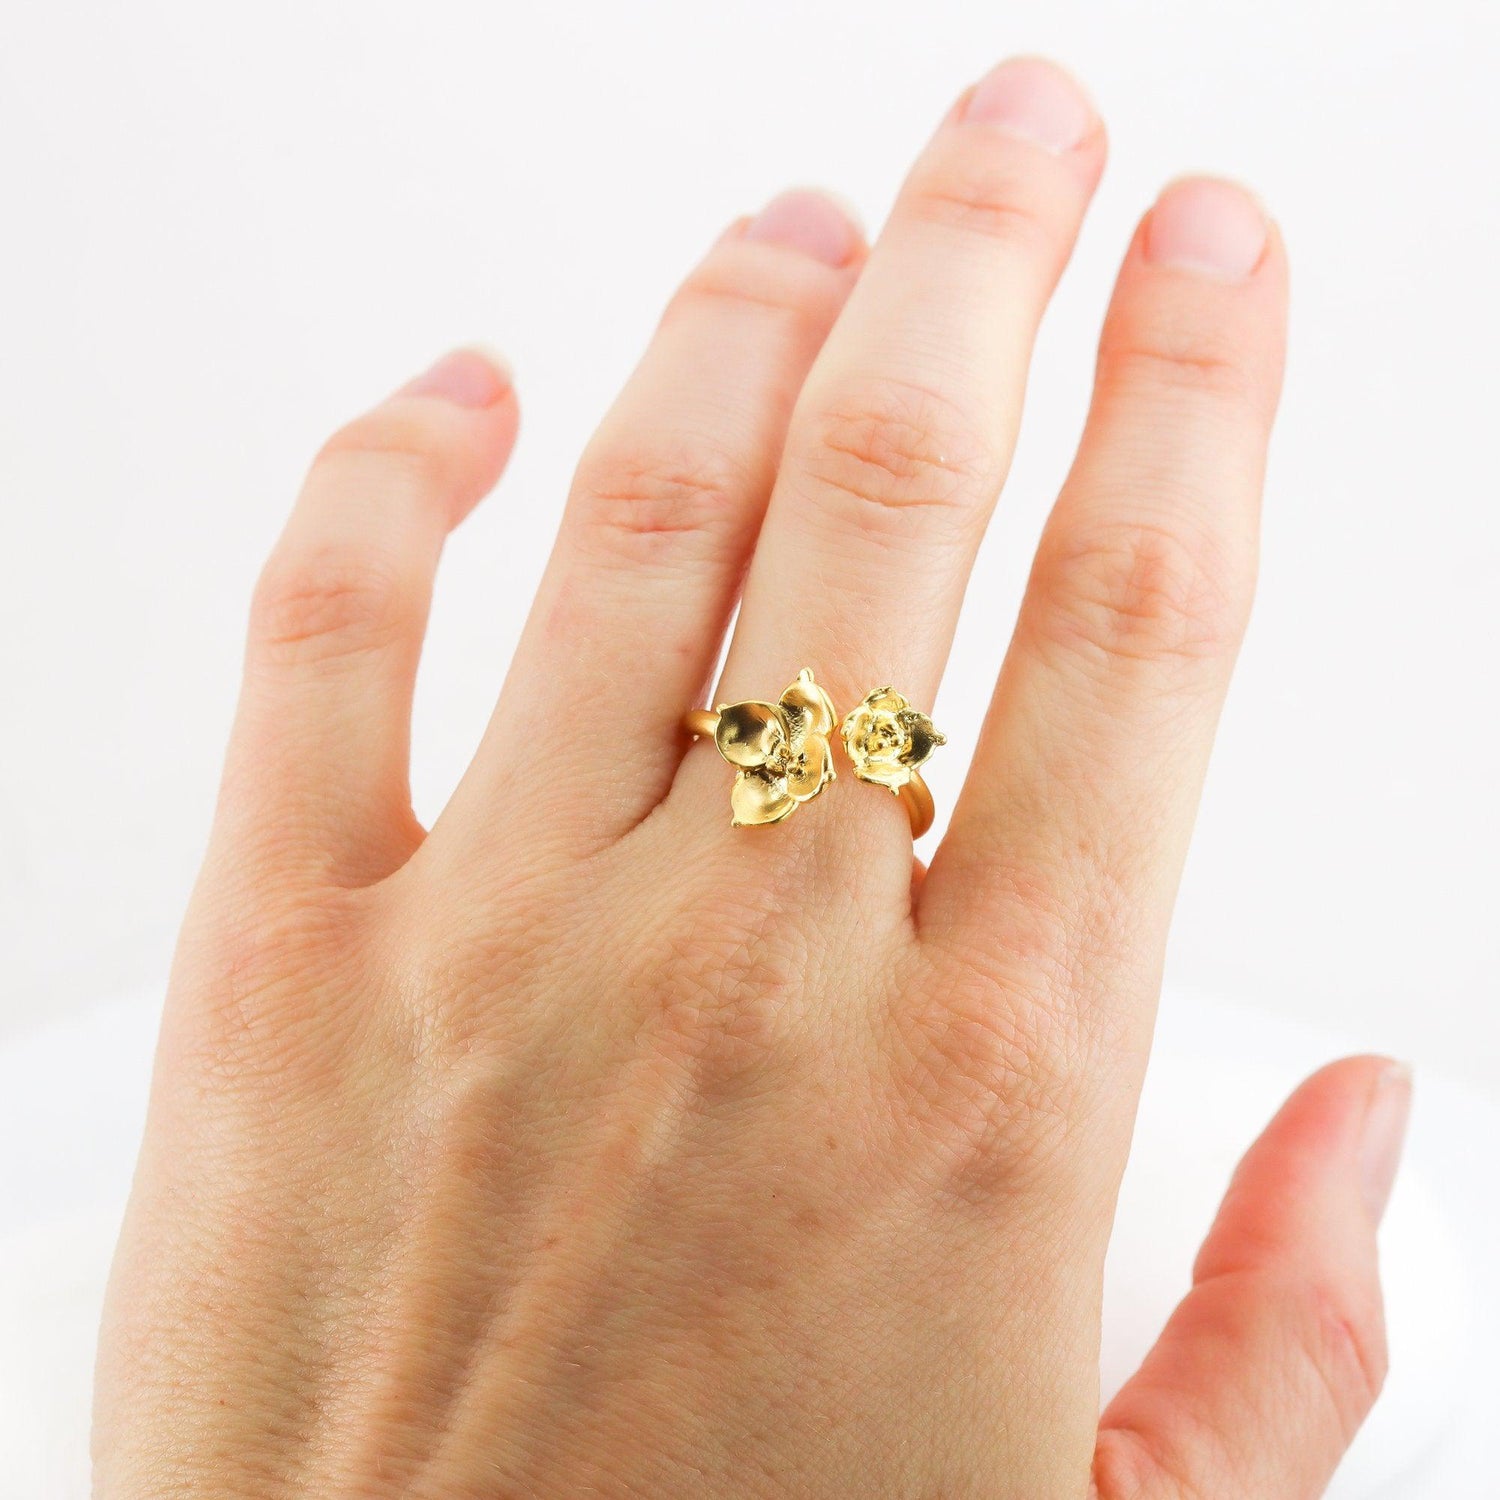 Succulent Flower Ring in Silver